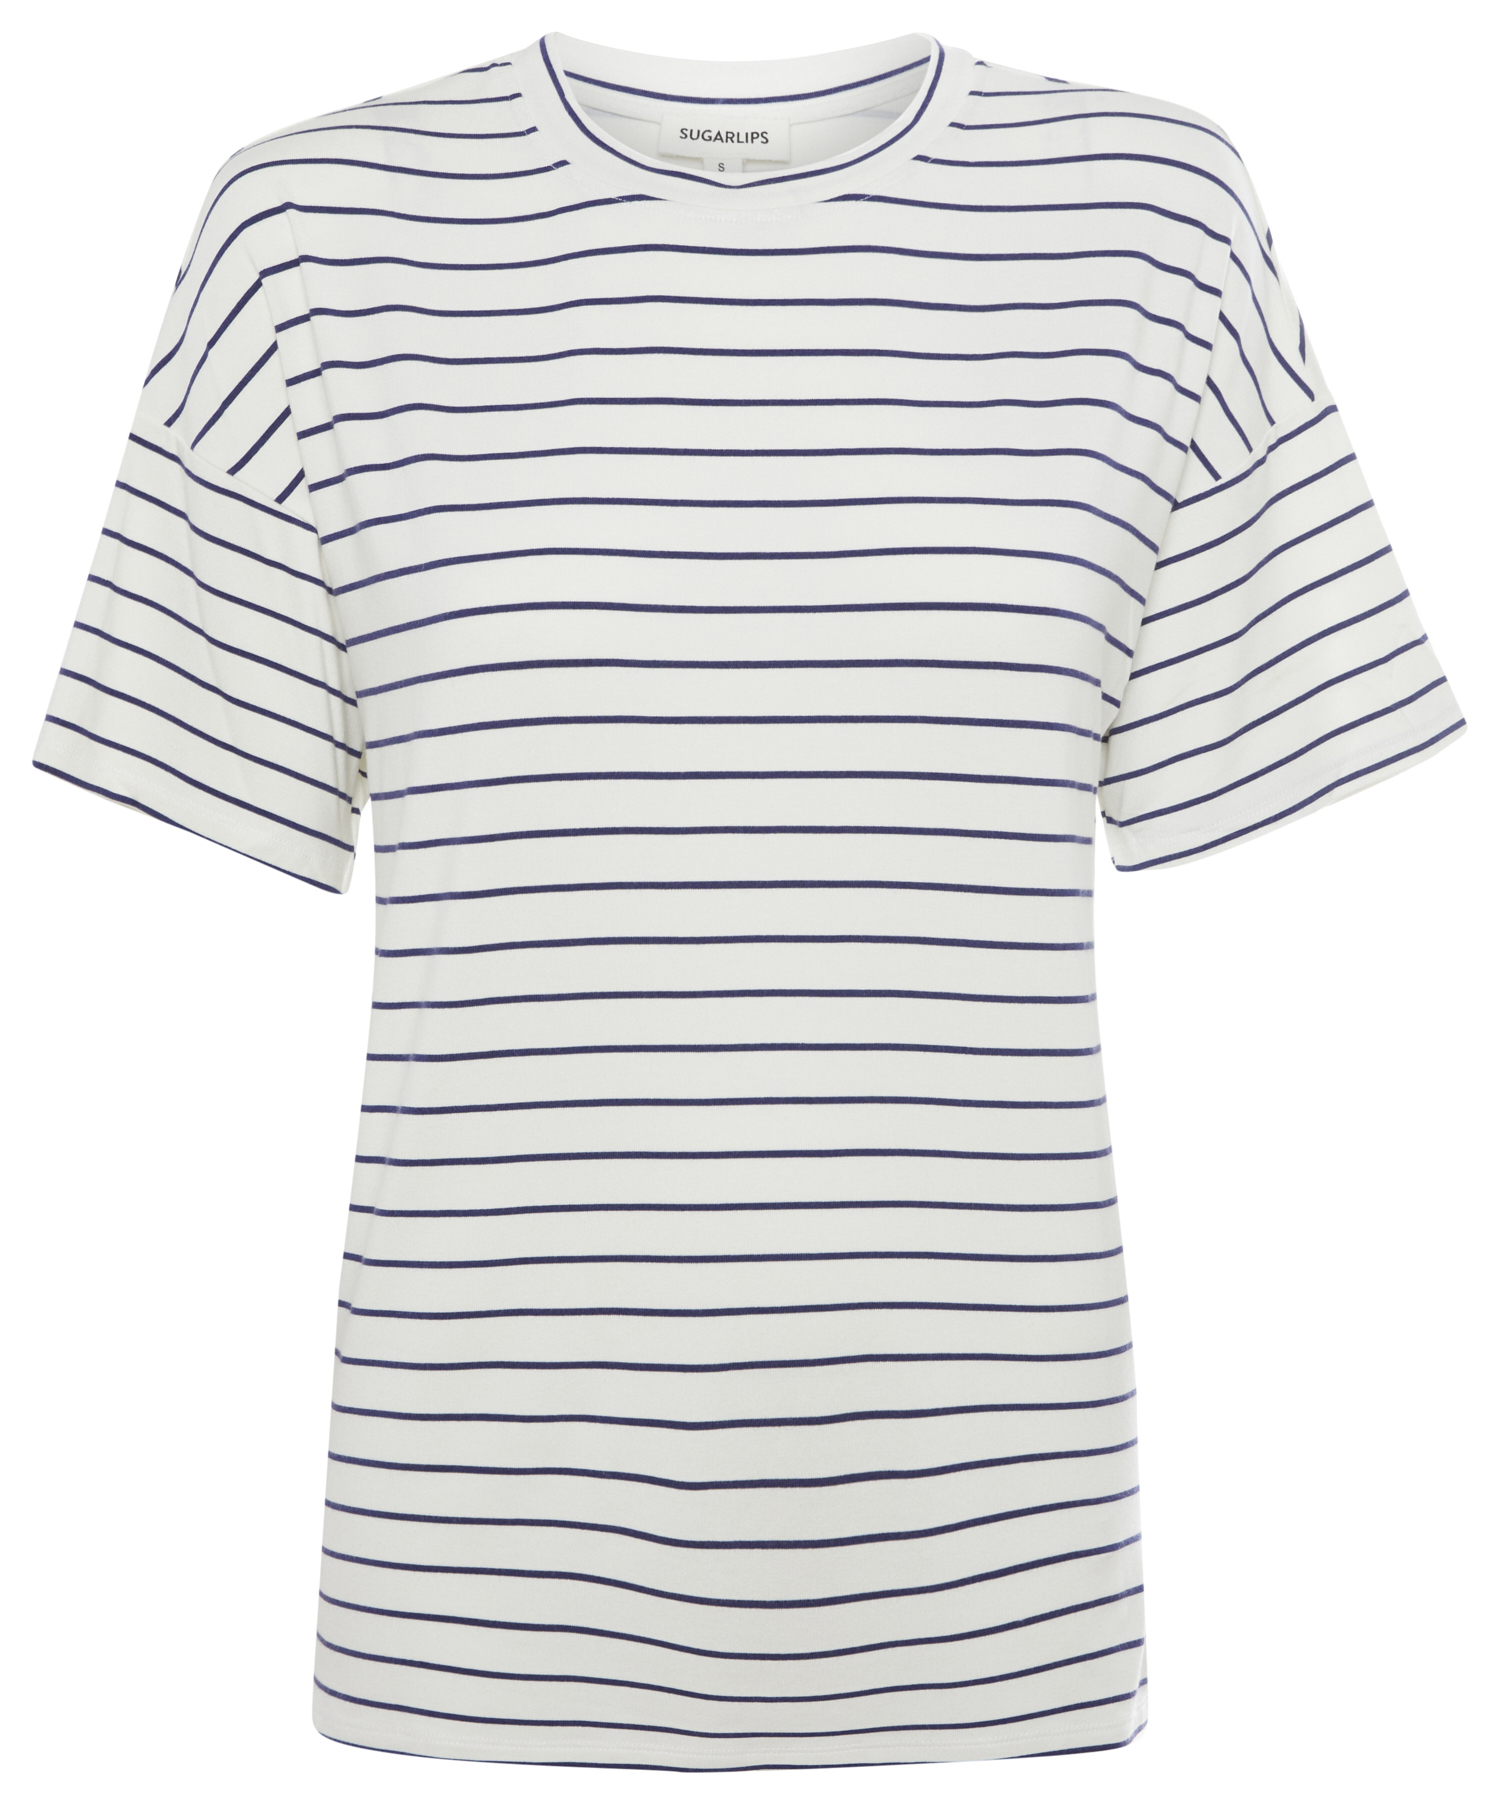 Striped Short Sleeve Top